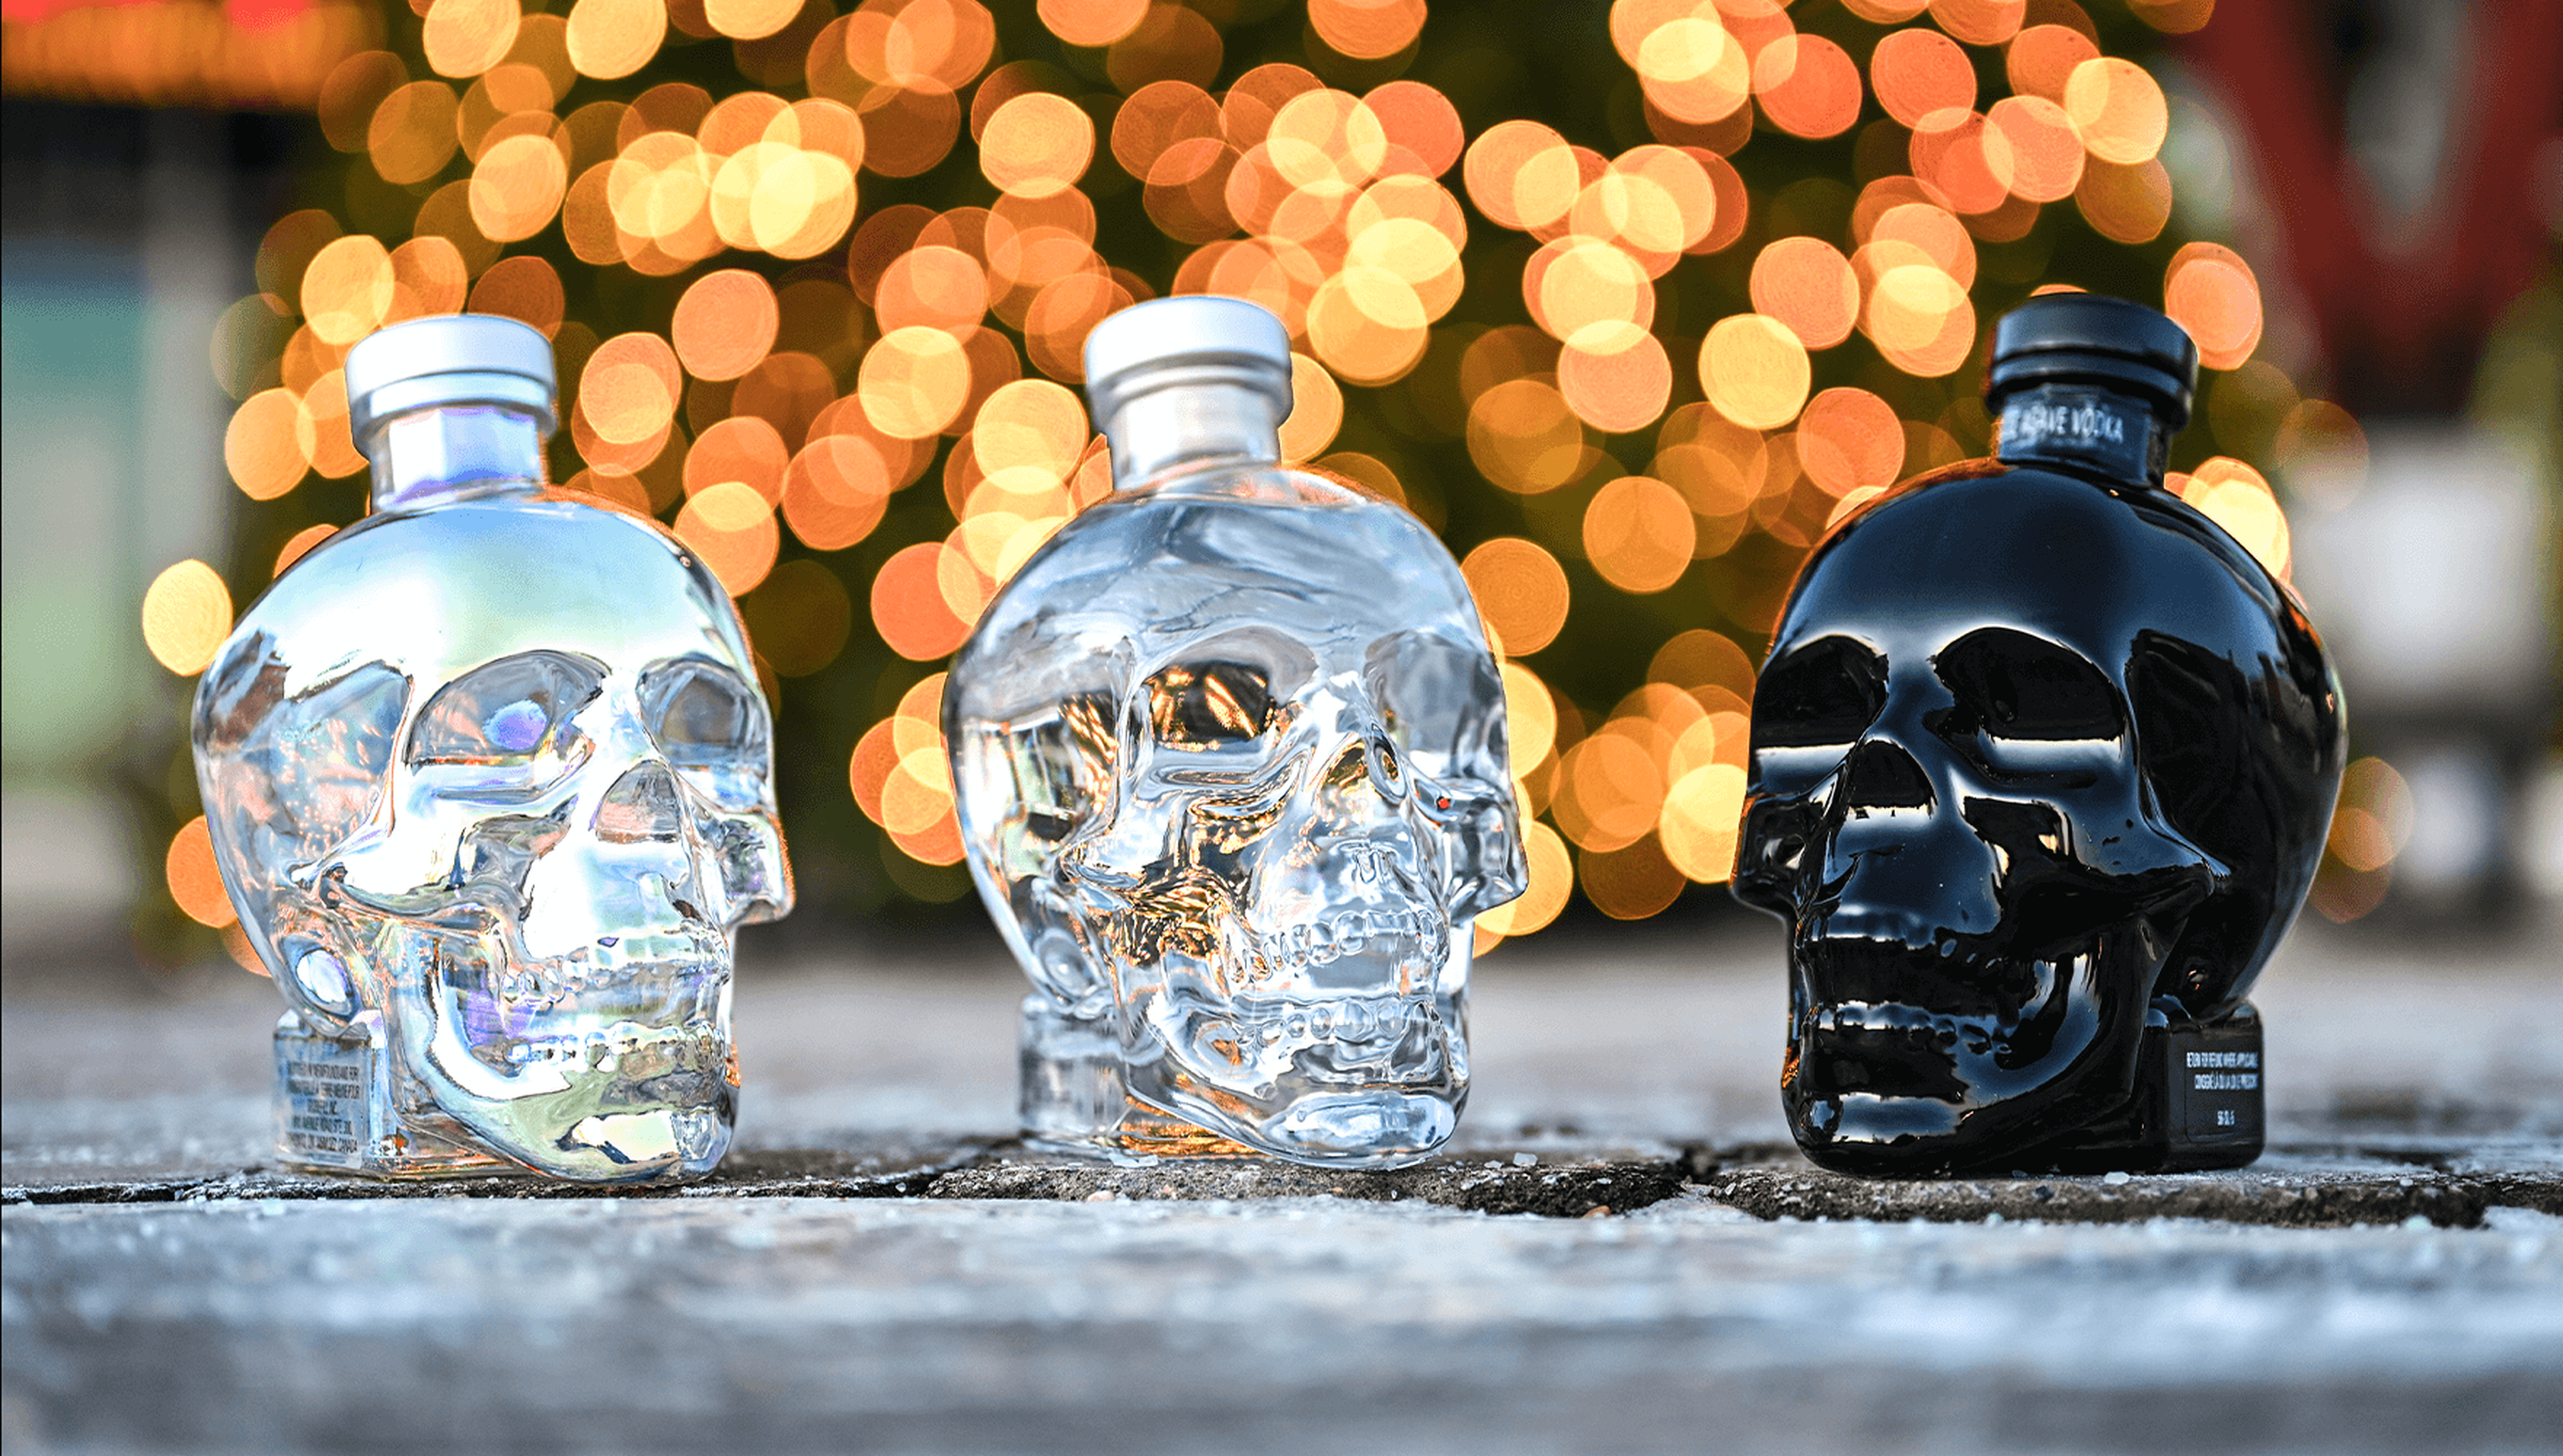 All three expressions of Crystal Head are showcased with bokeh lights in the background